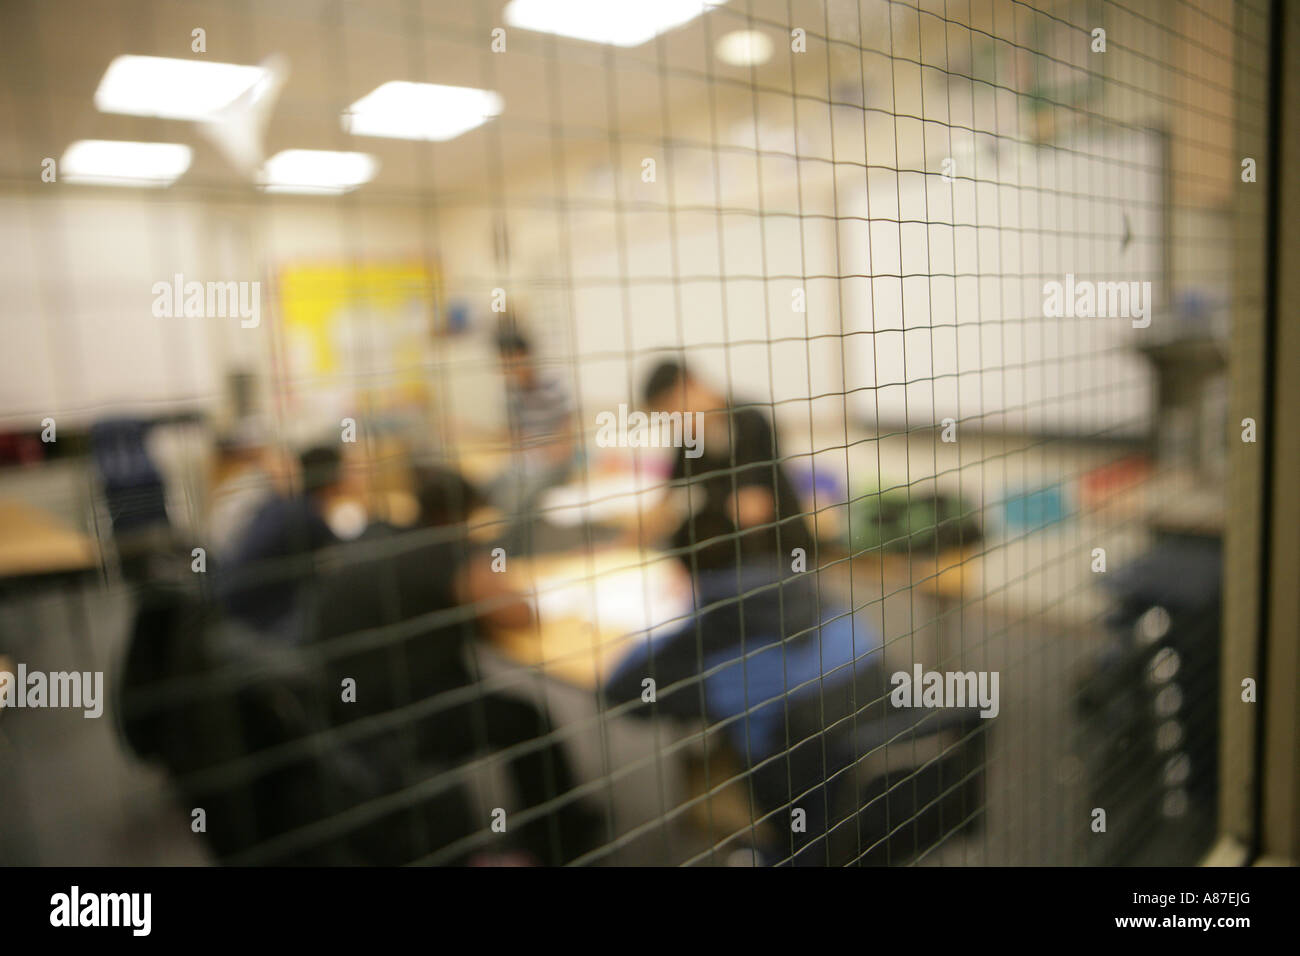 Grate of meshwork in classroom Stock Photo